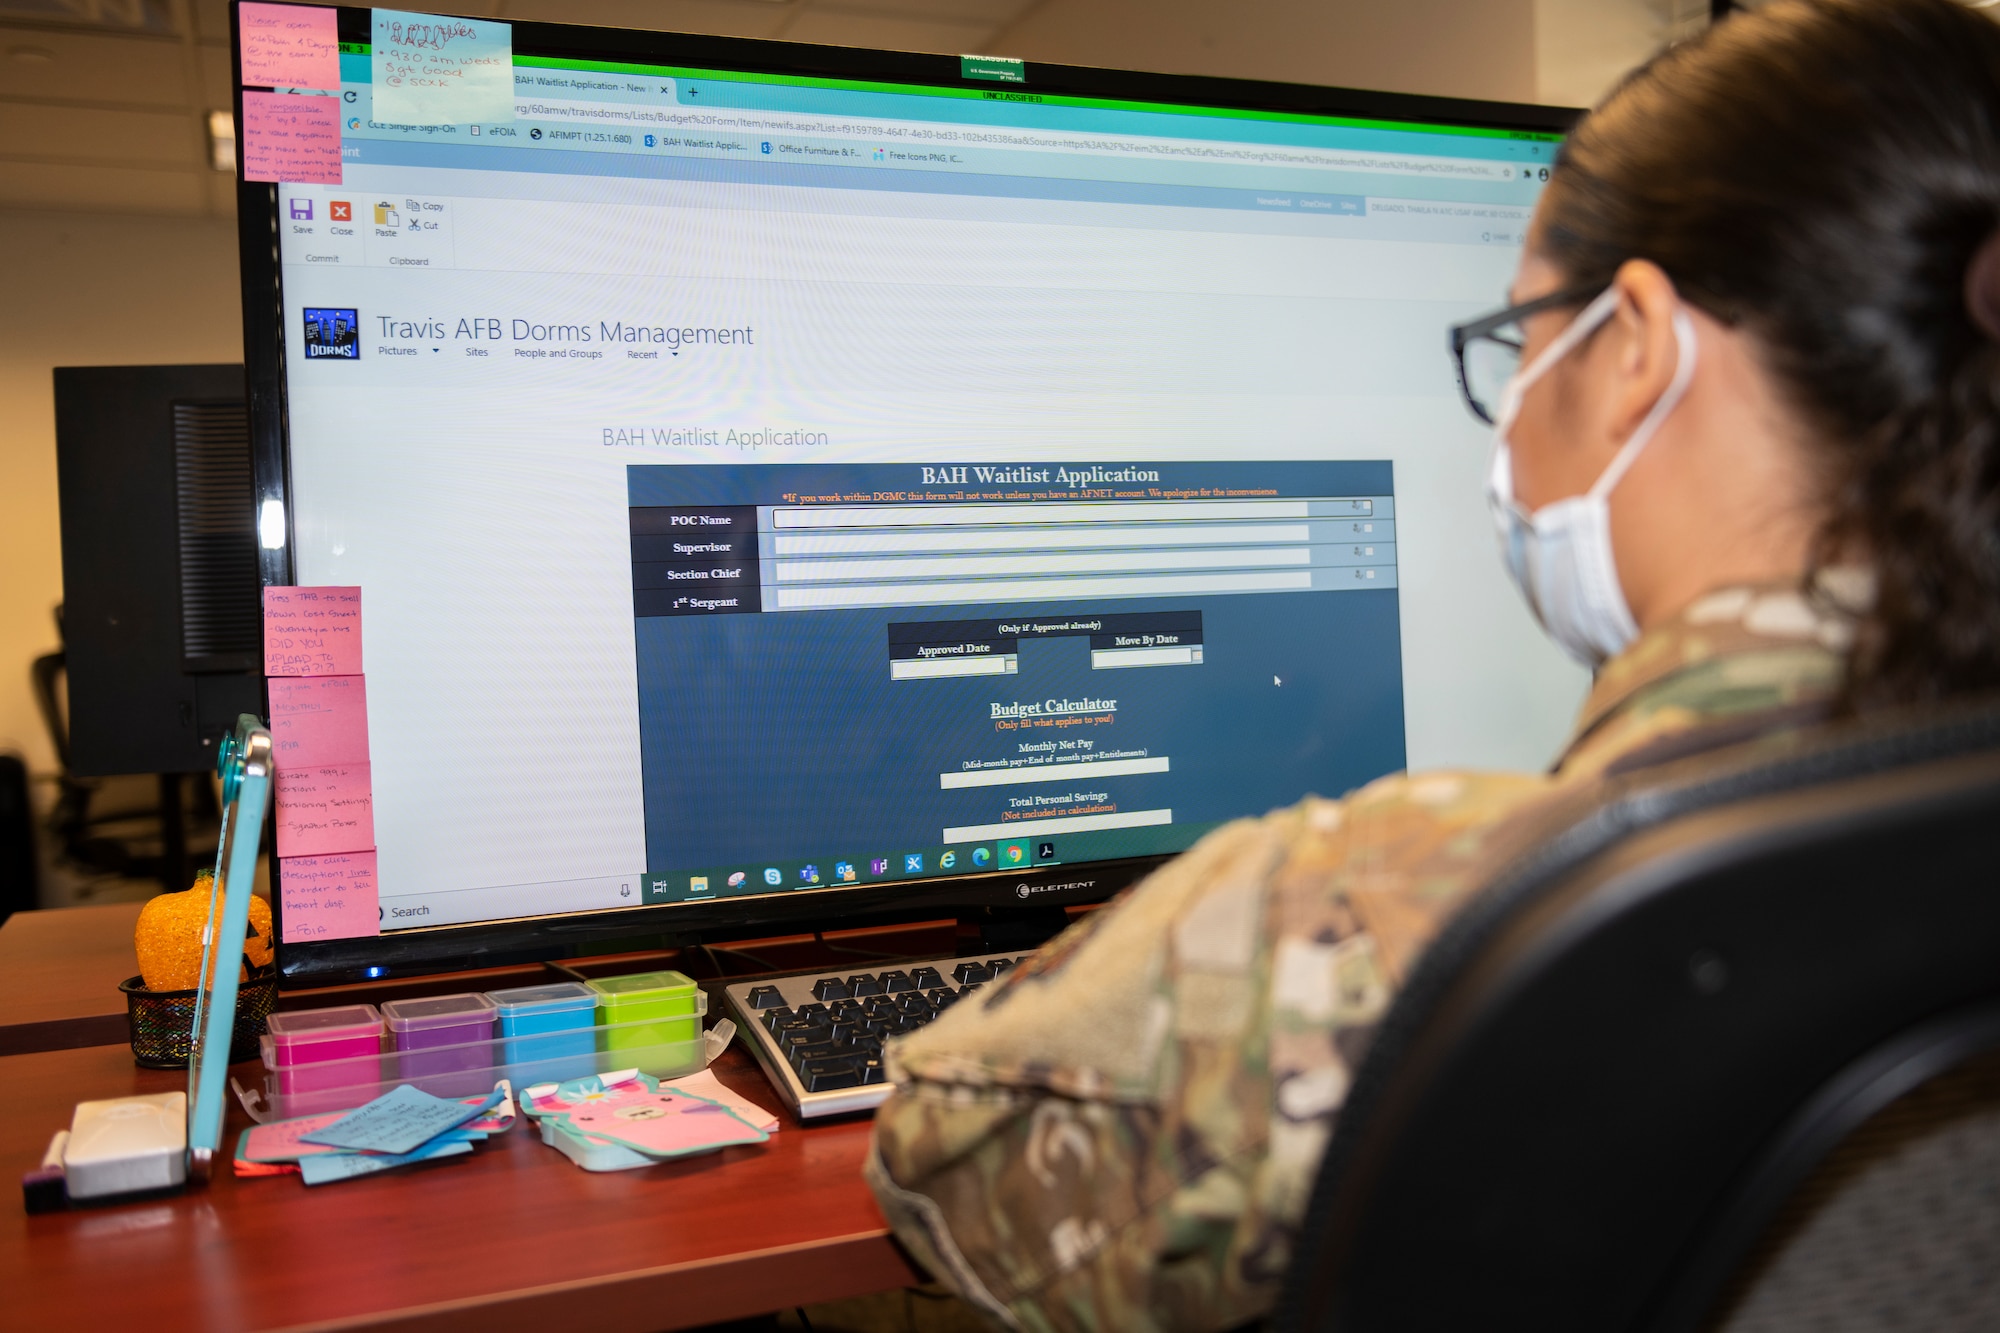 U.S. Airman 1st Class Thaila Delgado, 60th communications Squadron knowledge management craftsman, access’s the basic allowance for housing waitlist application website Feb. 18, 2020, at Travis Air Force Base, California. Delgado drafted and coordinated with multiple base agencies to create a site that helps Airmen line up their budgeting, in efforts to help them move out of the base dorms more easily. (U.S. Air Force photo by Senior Airman Cameron Otte)